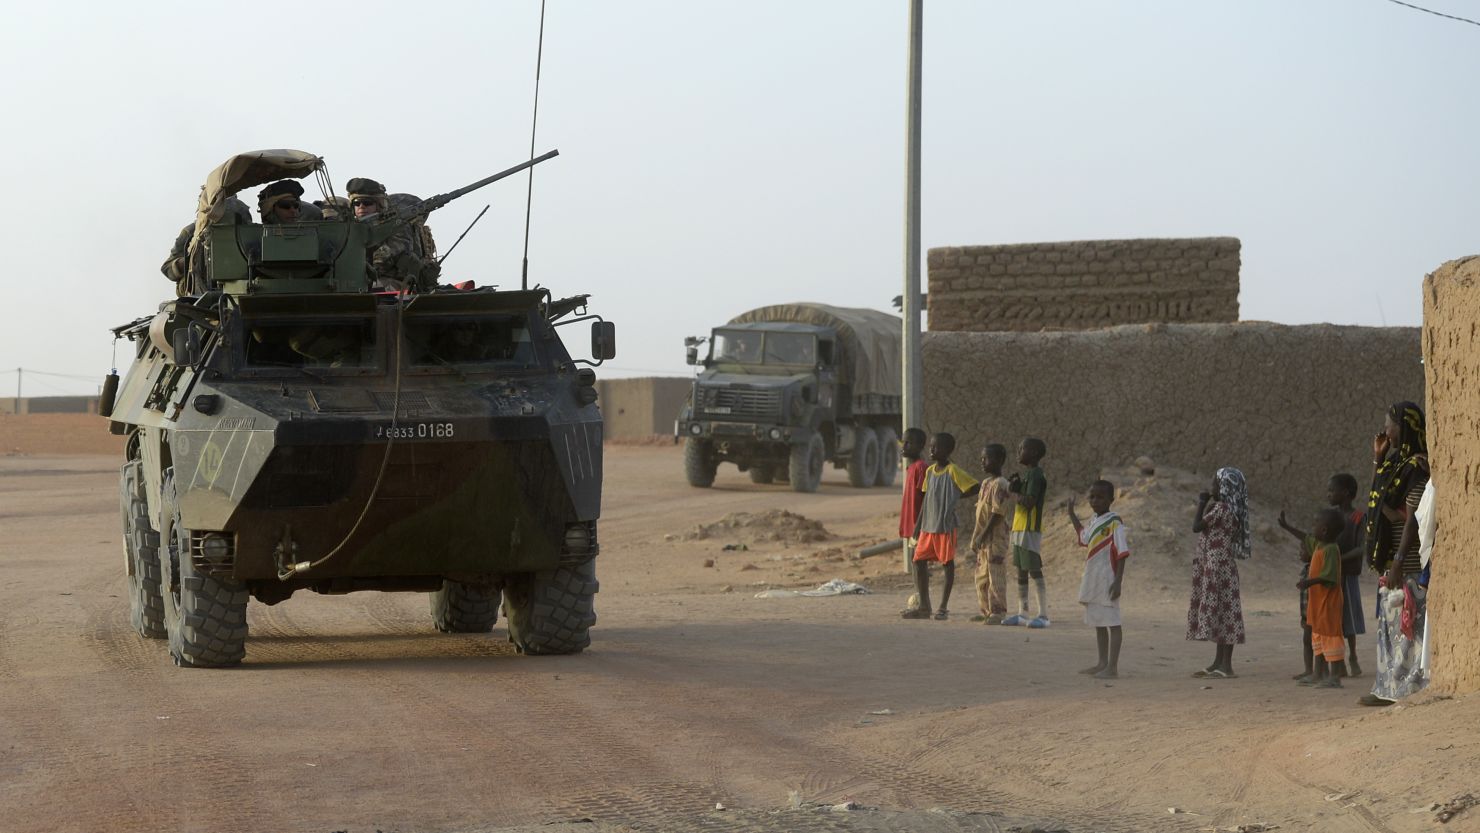 French troops have gone after militants in Mali, a former French colony. Here, a convoy passes civilians in northern Mali.